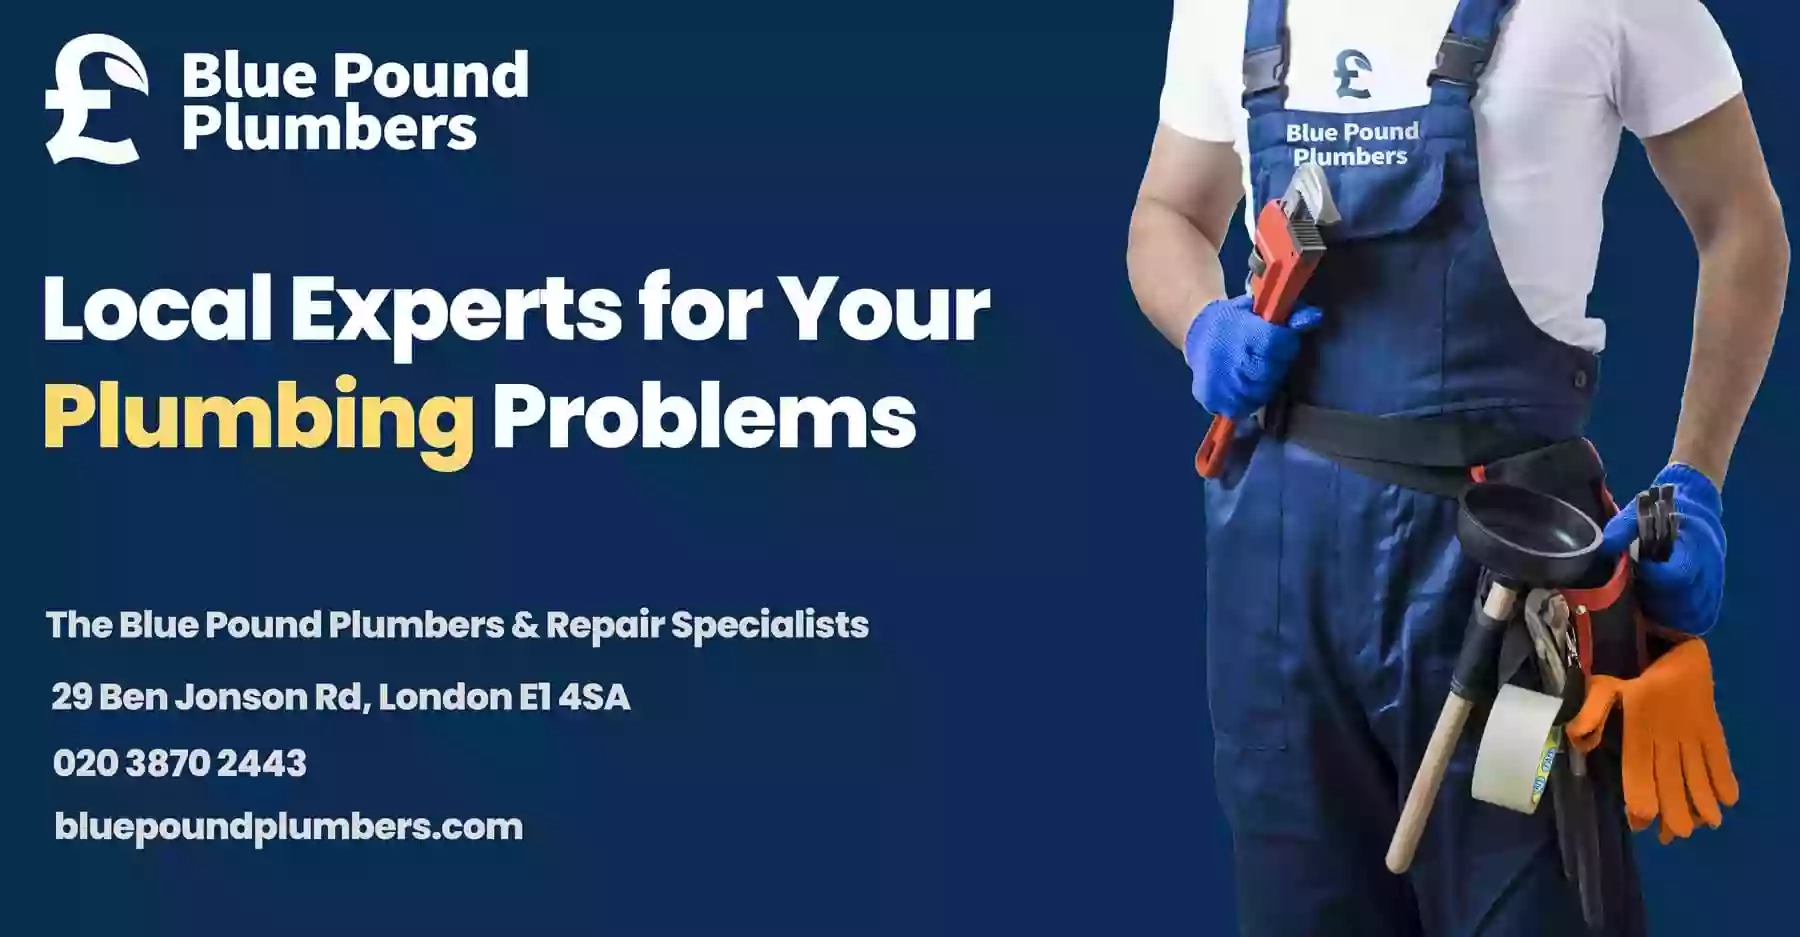 The Blue Pound Plumbers & Repair Specialists